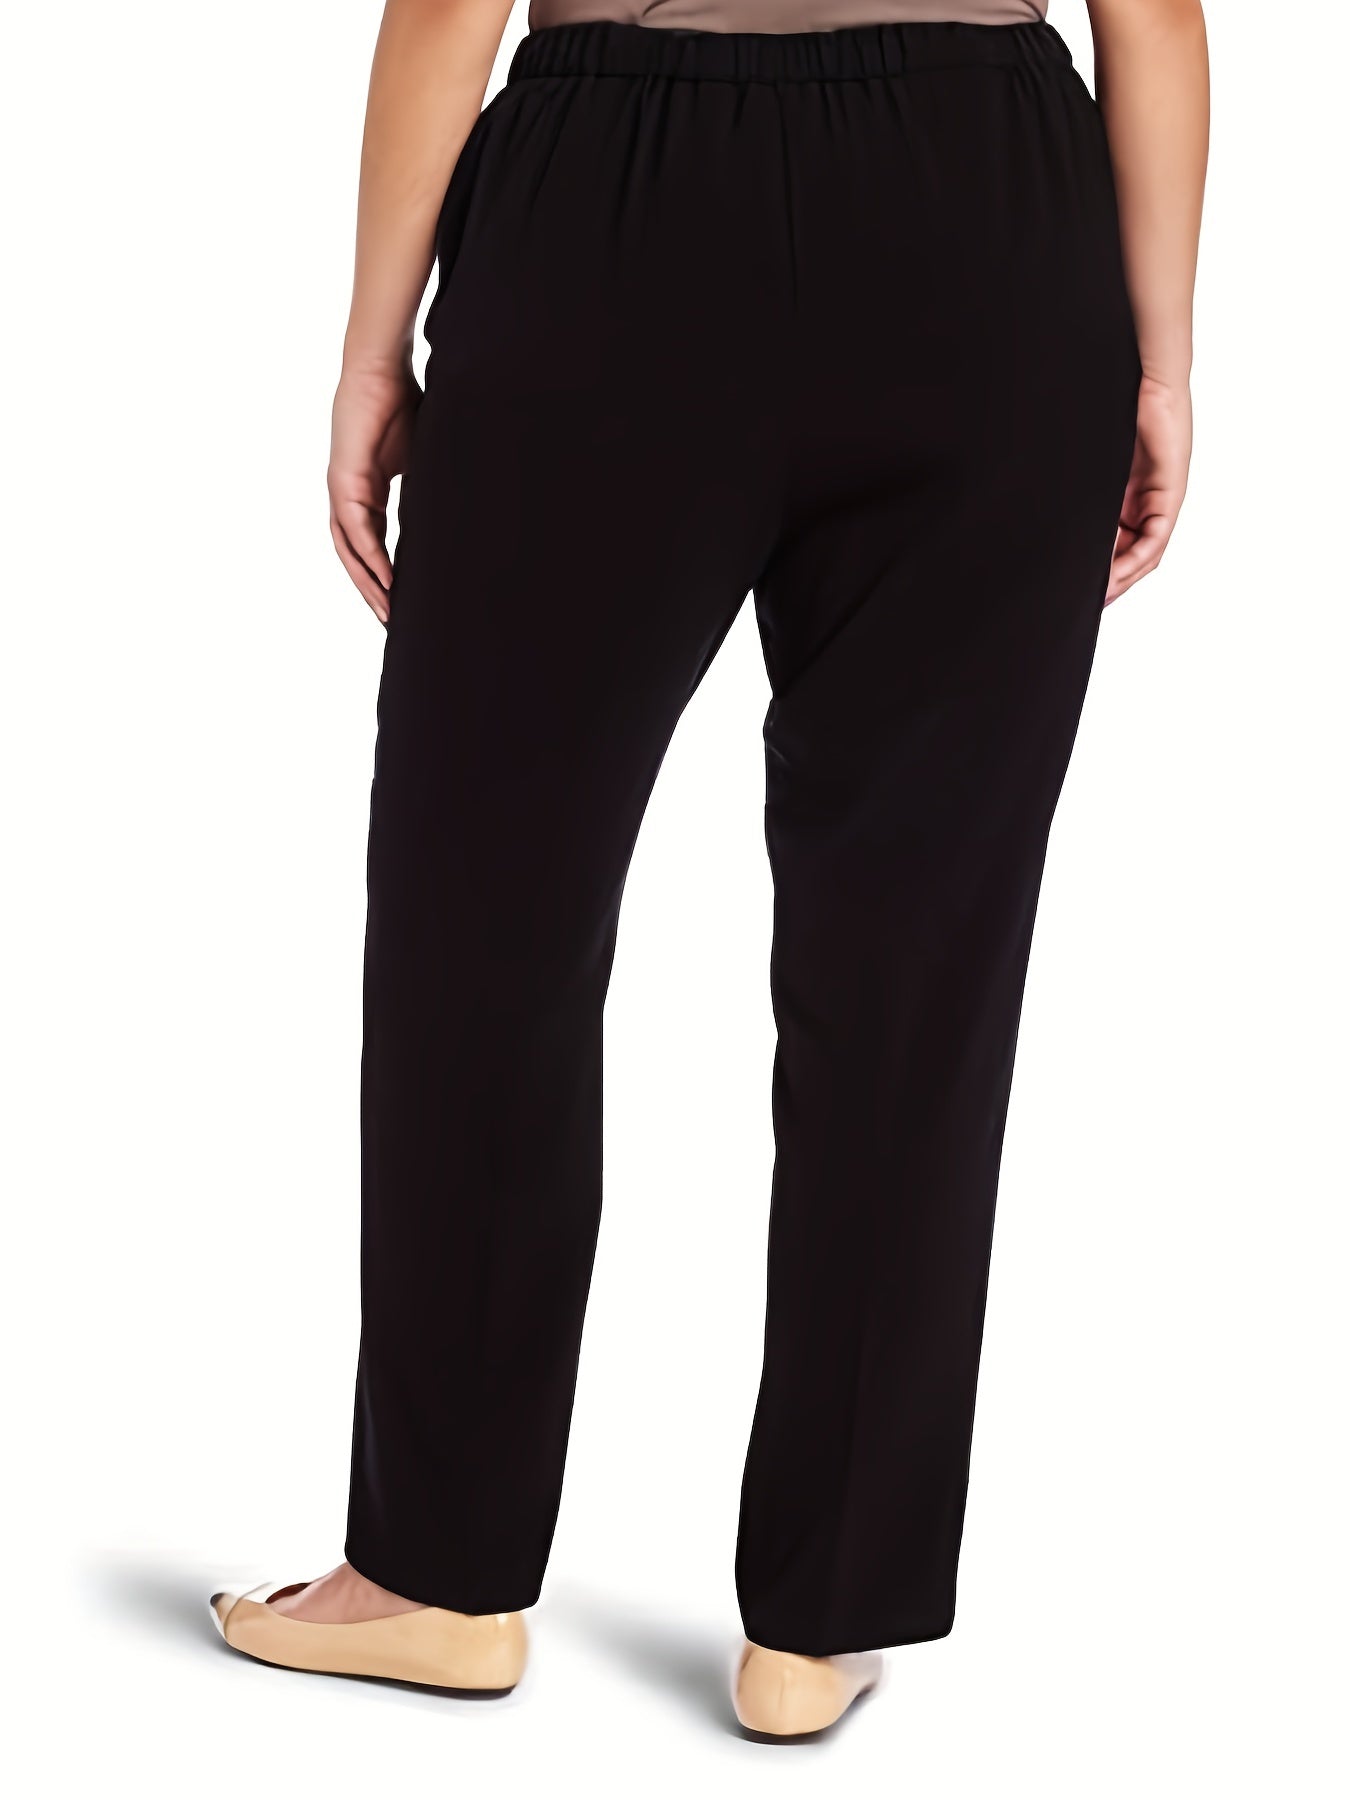 Plus Size Casual Pants, Women's Plus Solid High Stretch Straight Leg Pants With Pockets